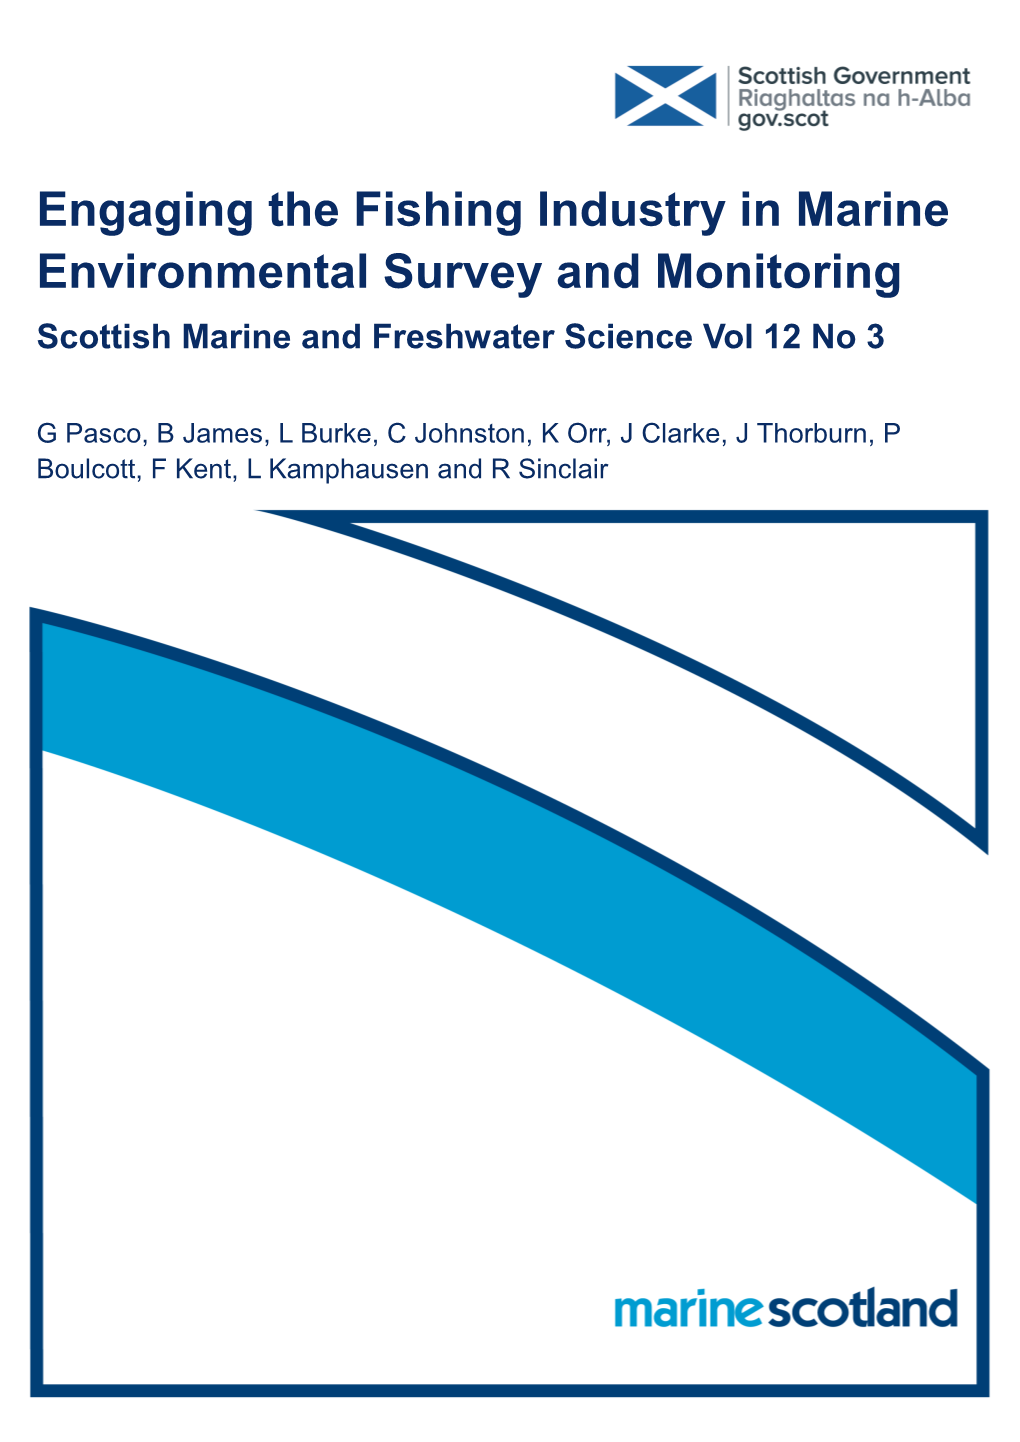 Engaging the Fishing Industry in Marine Environmental Survey and Monitoring Scottish Marine and Freshwater Science Vol 12 No 3